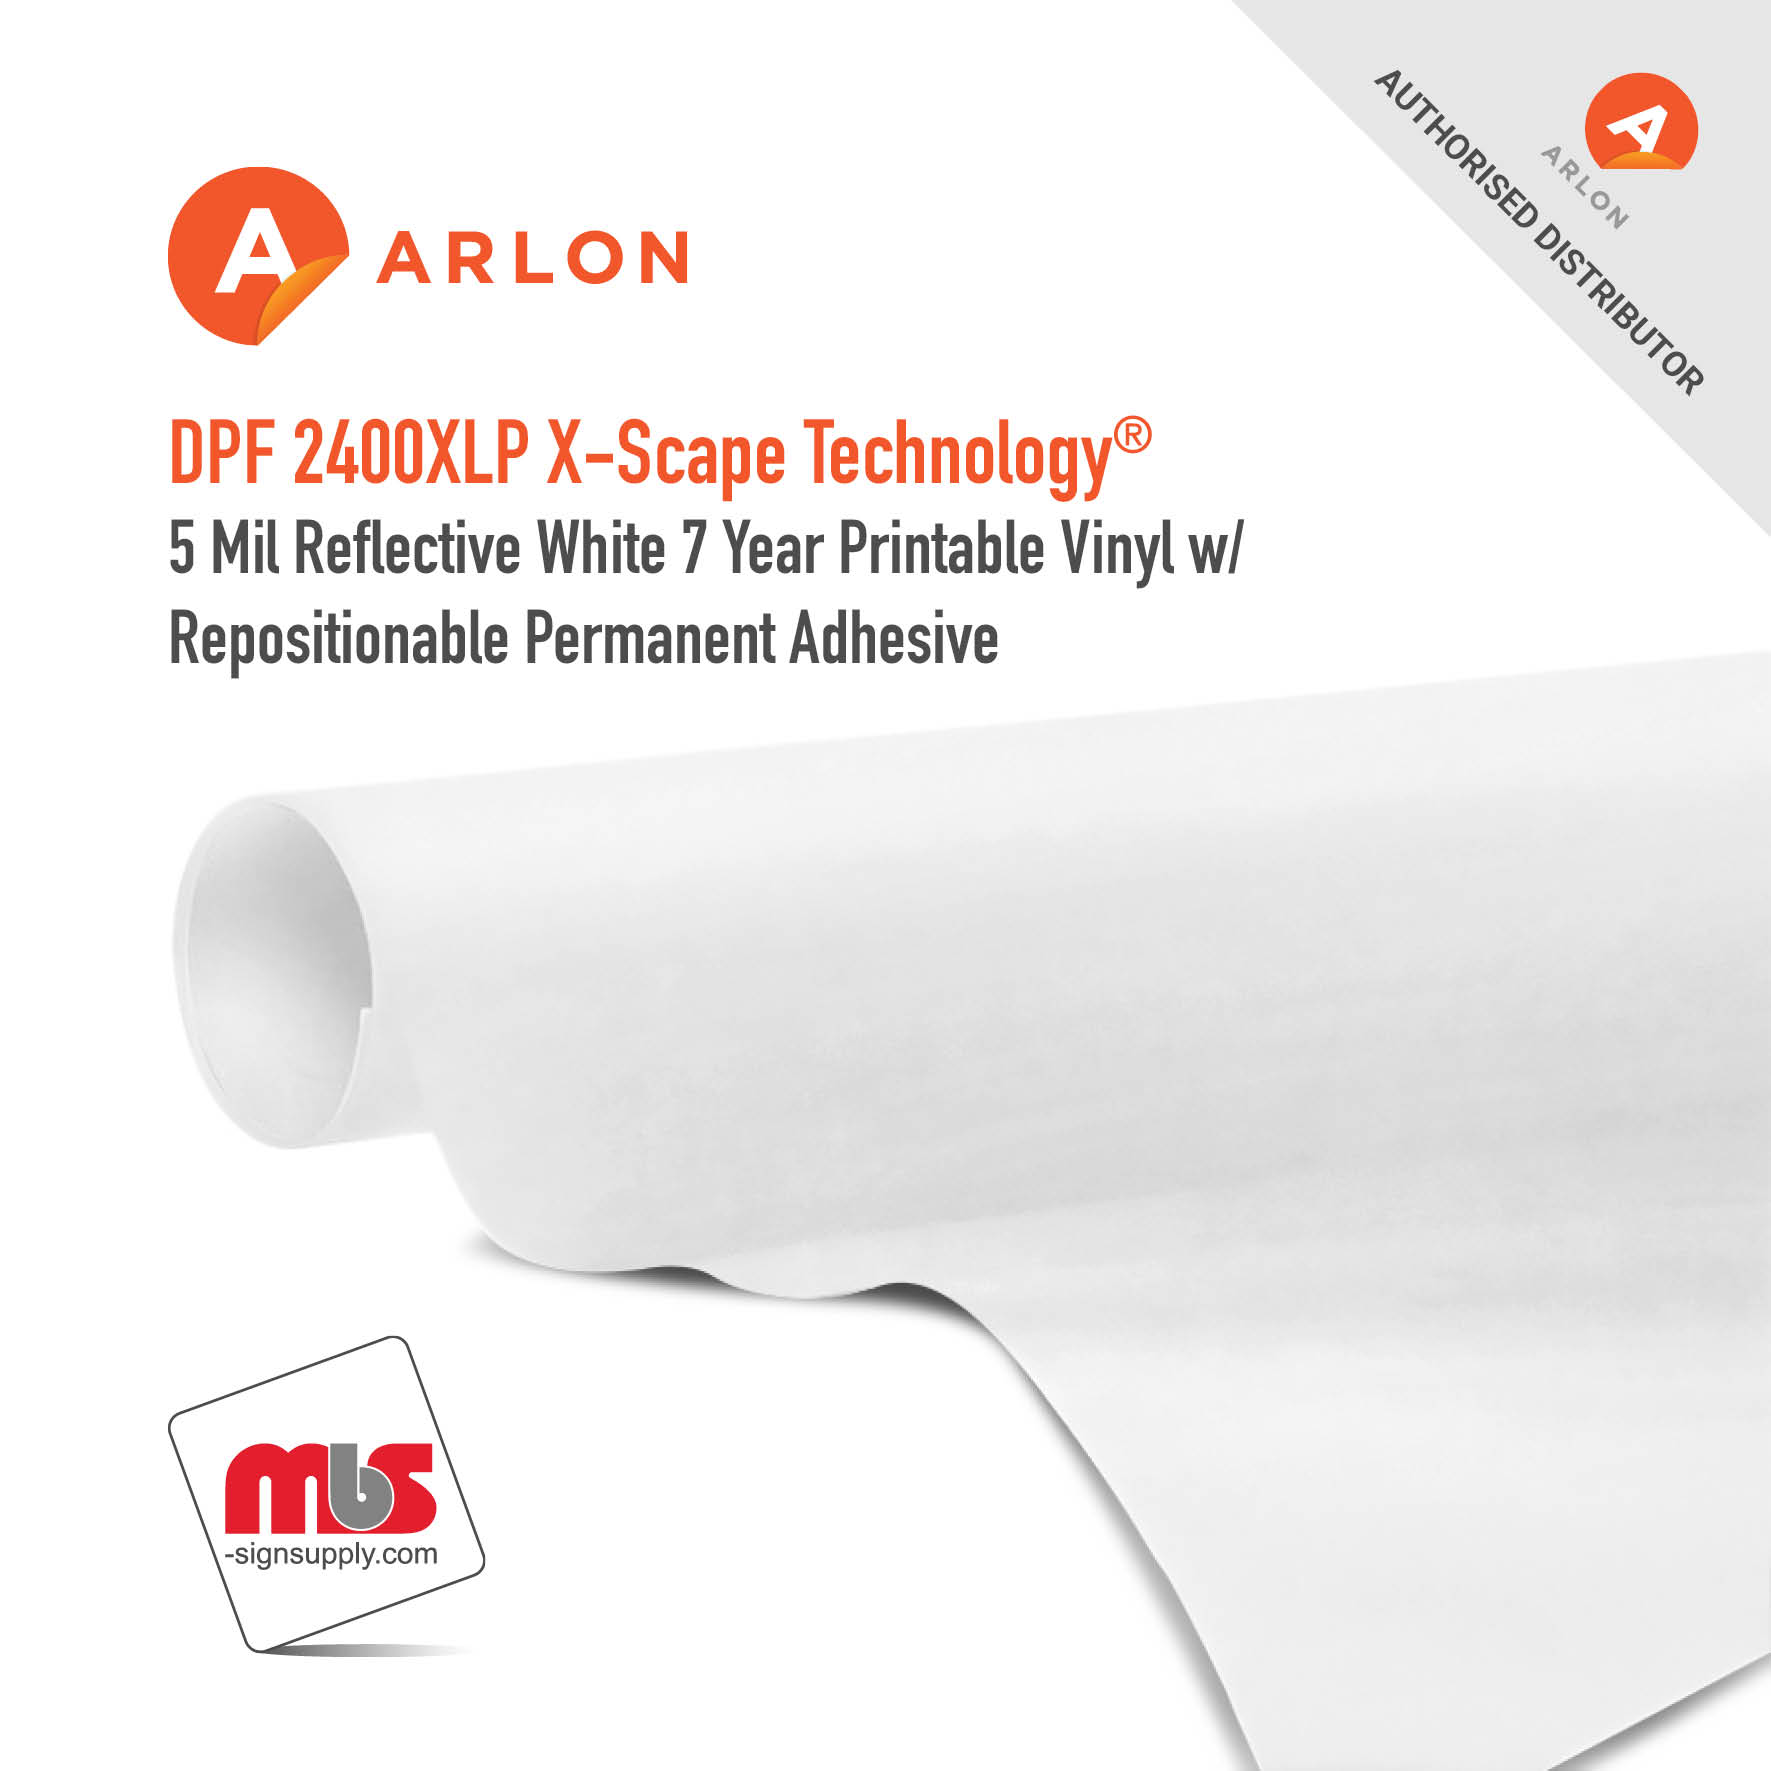 48'' x 25 Yard Roll - Arlon DPF 2400XLP X-Scape Technology® 5 Mil Reflective White 7 Year Printable Vinyl w/ Repositionable Permanent Adhesive